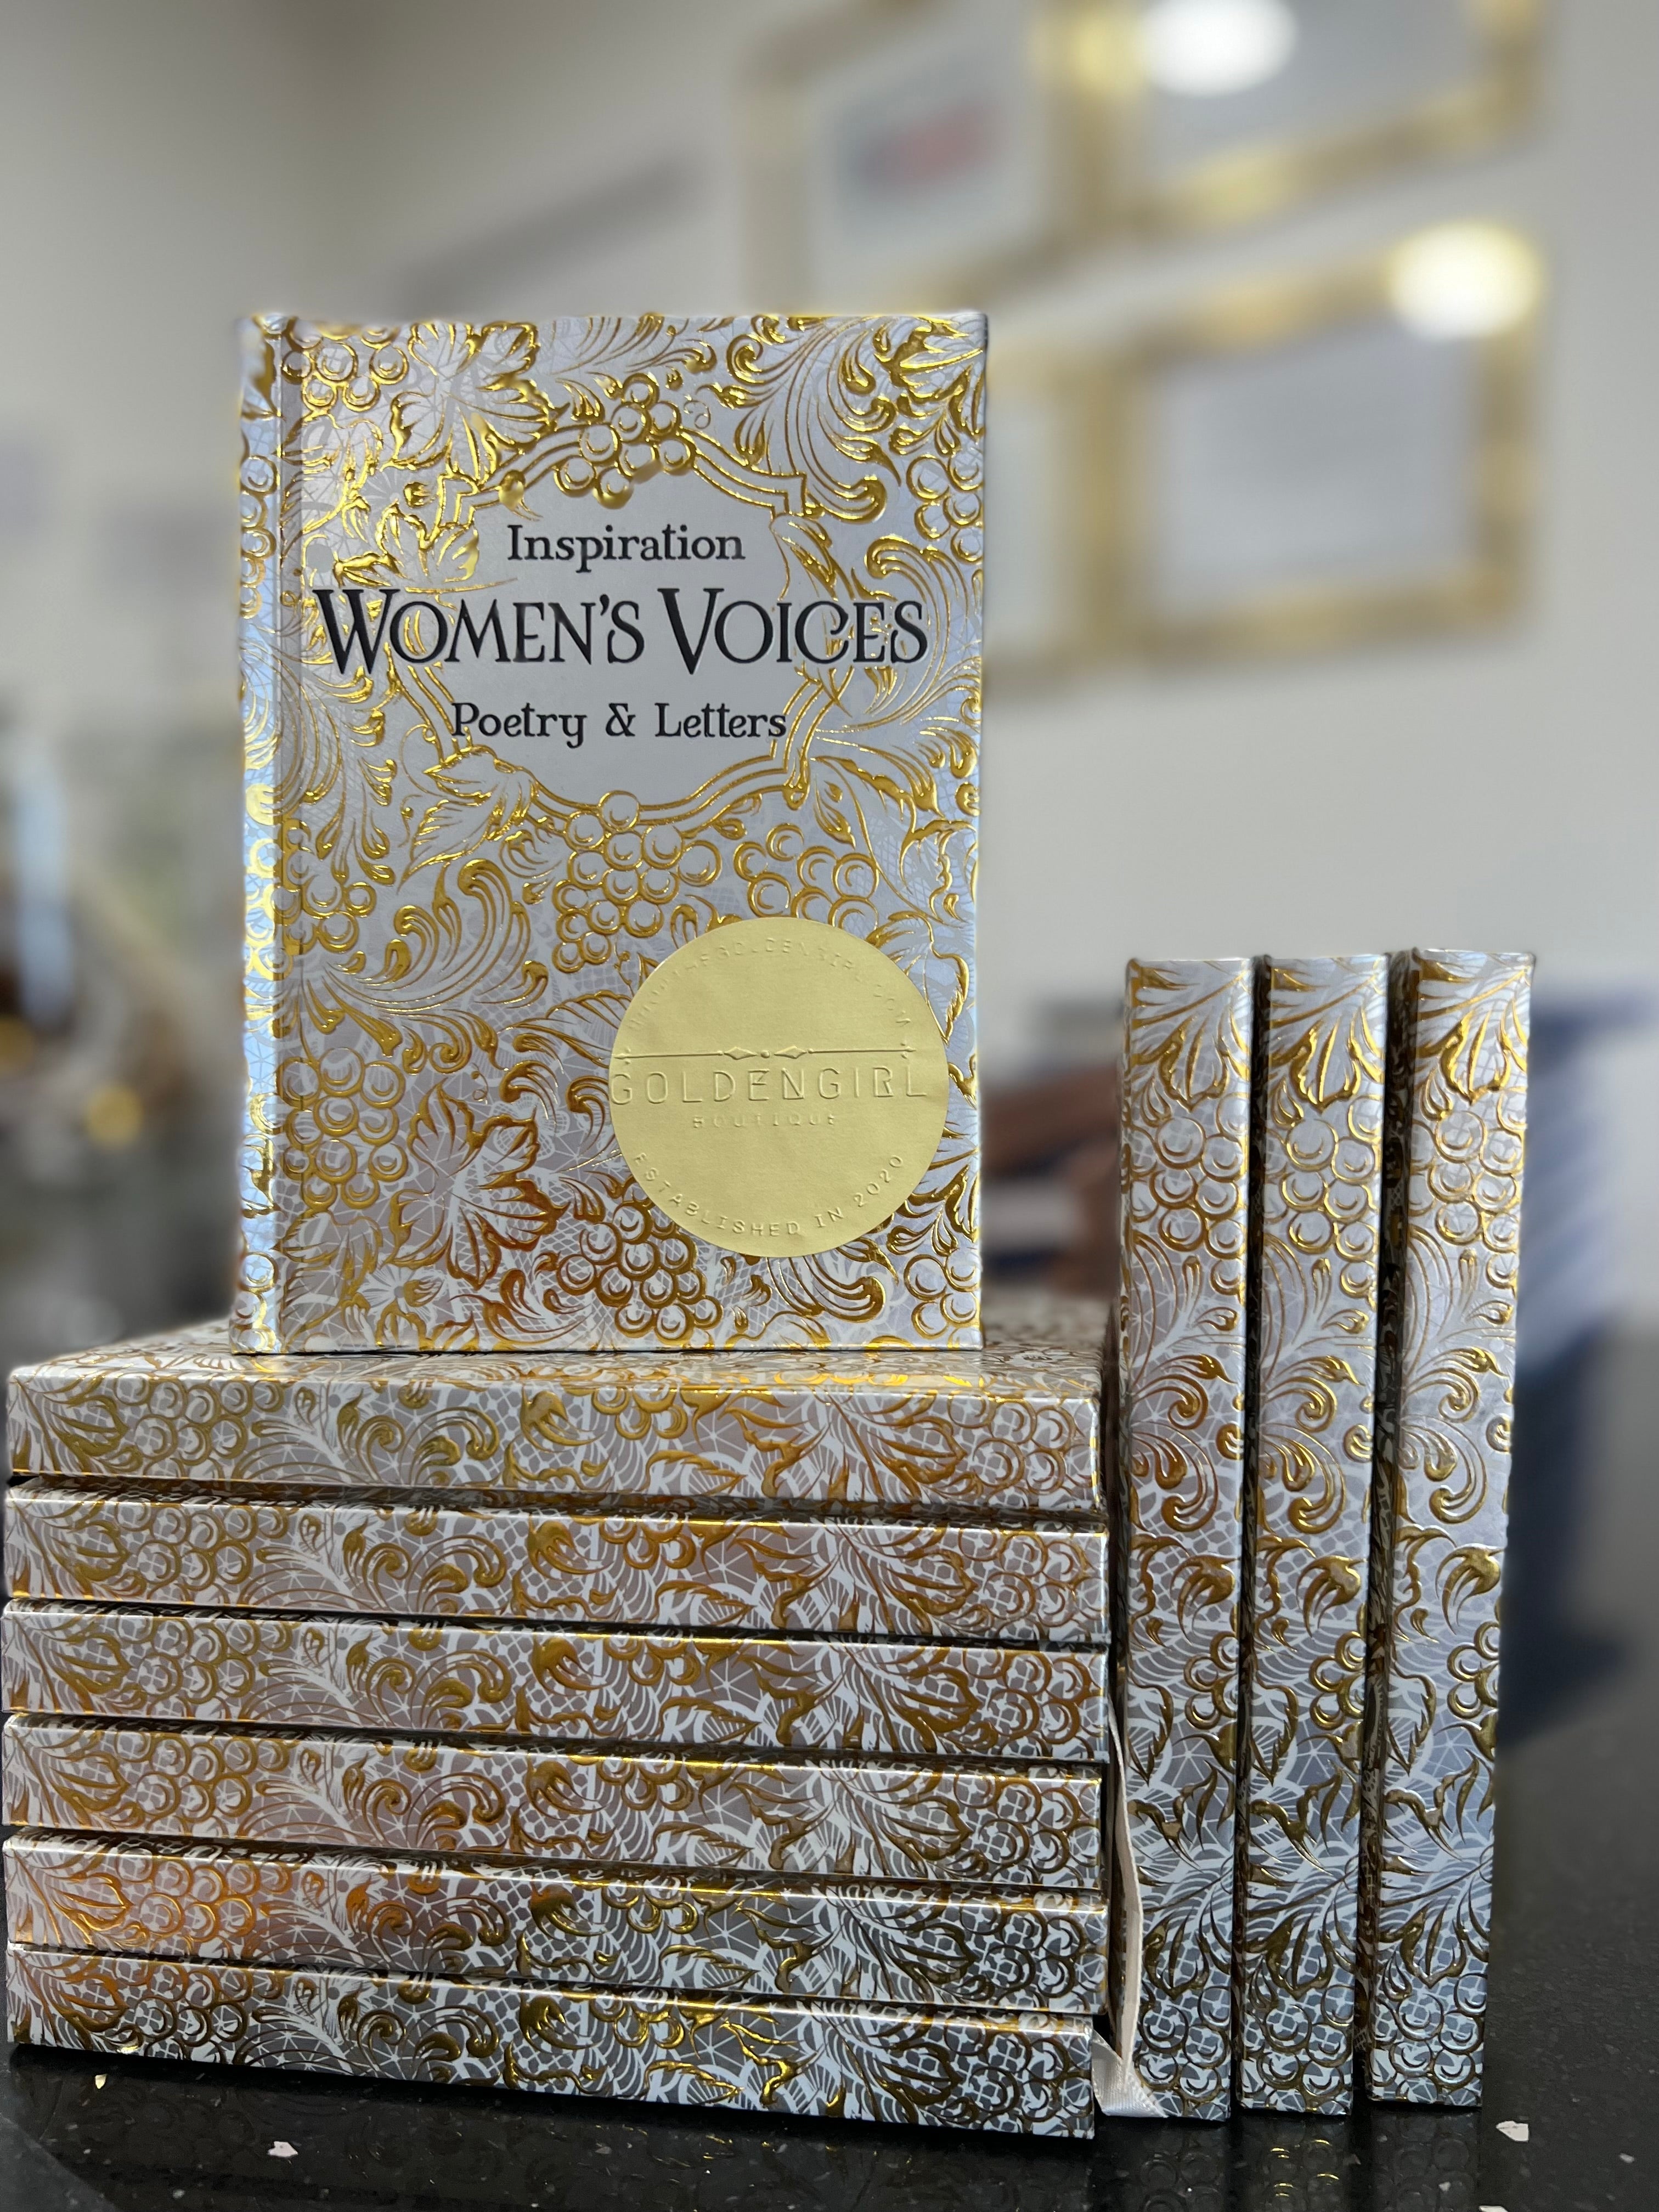 Women’s Voices: Poetry & Letters